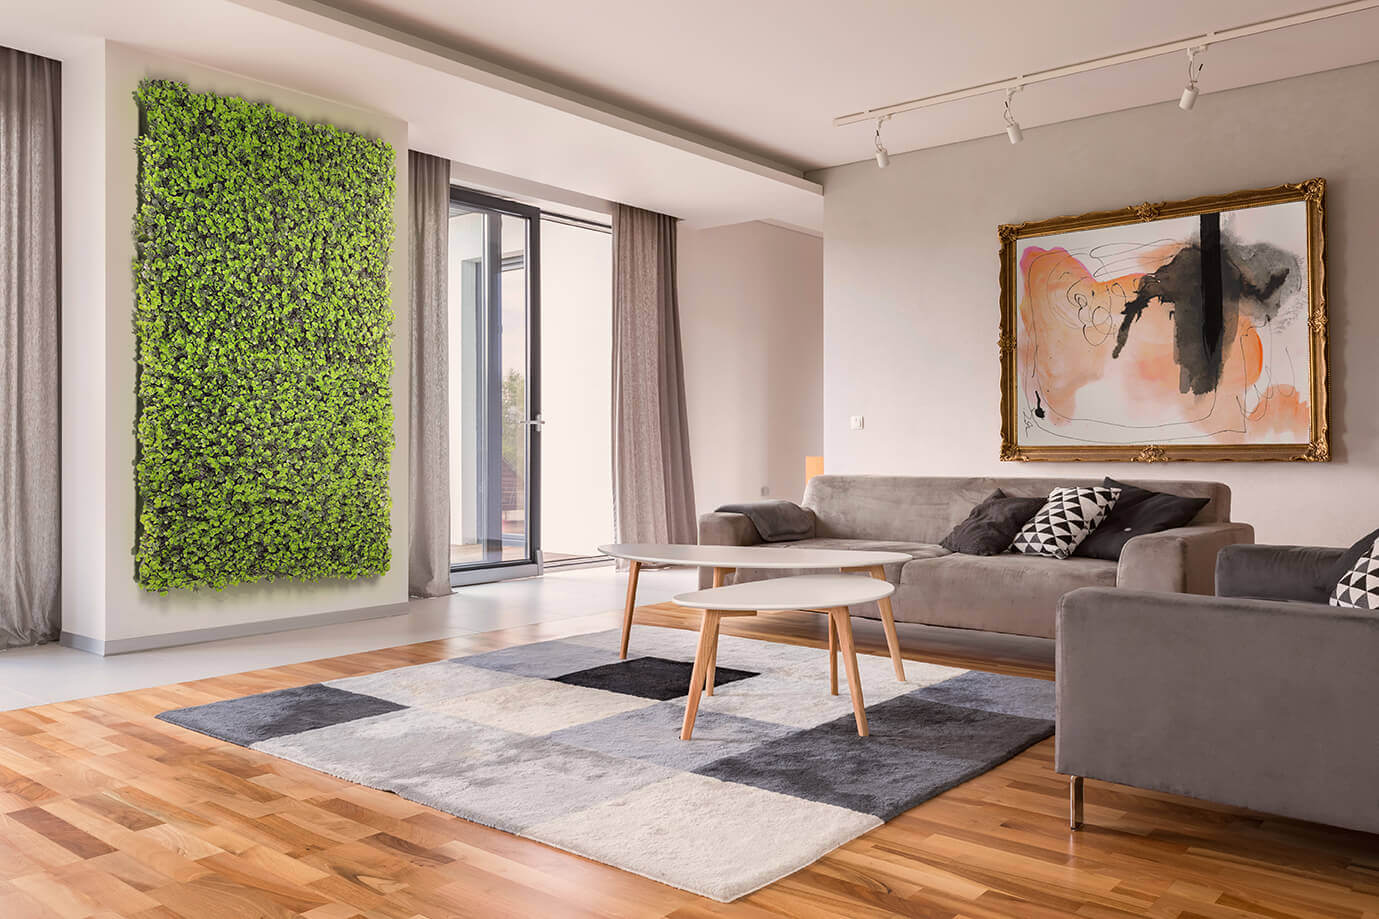 Residential living room artificial living wall